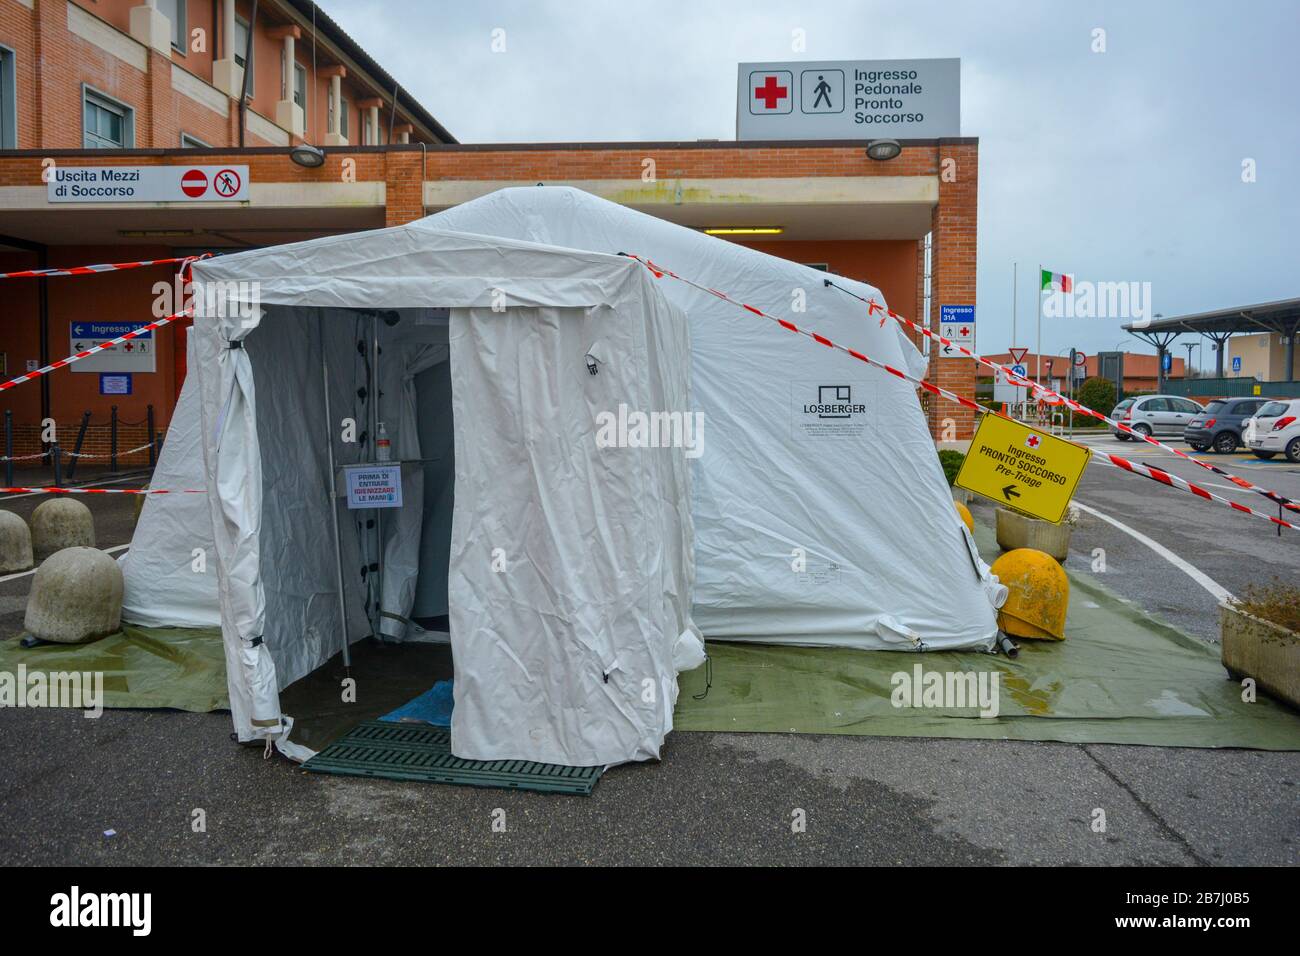 Triage outside the hospital due to coronavirus epidemic. Temporary tent set outside the emergency room to measure body temperature to fight pandemic Stock Photo